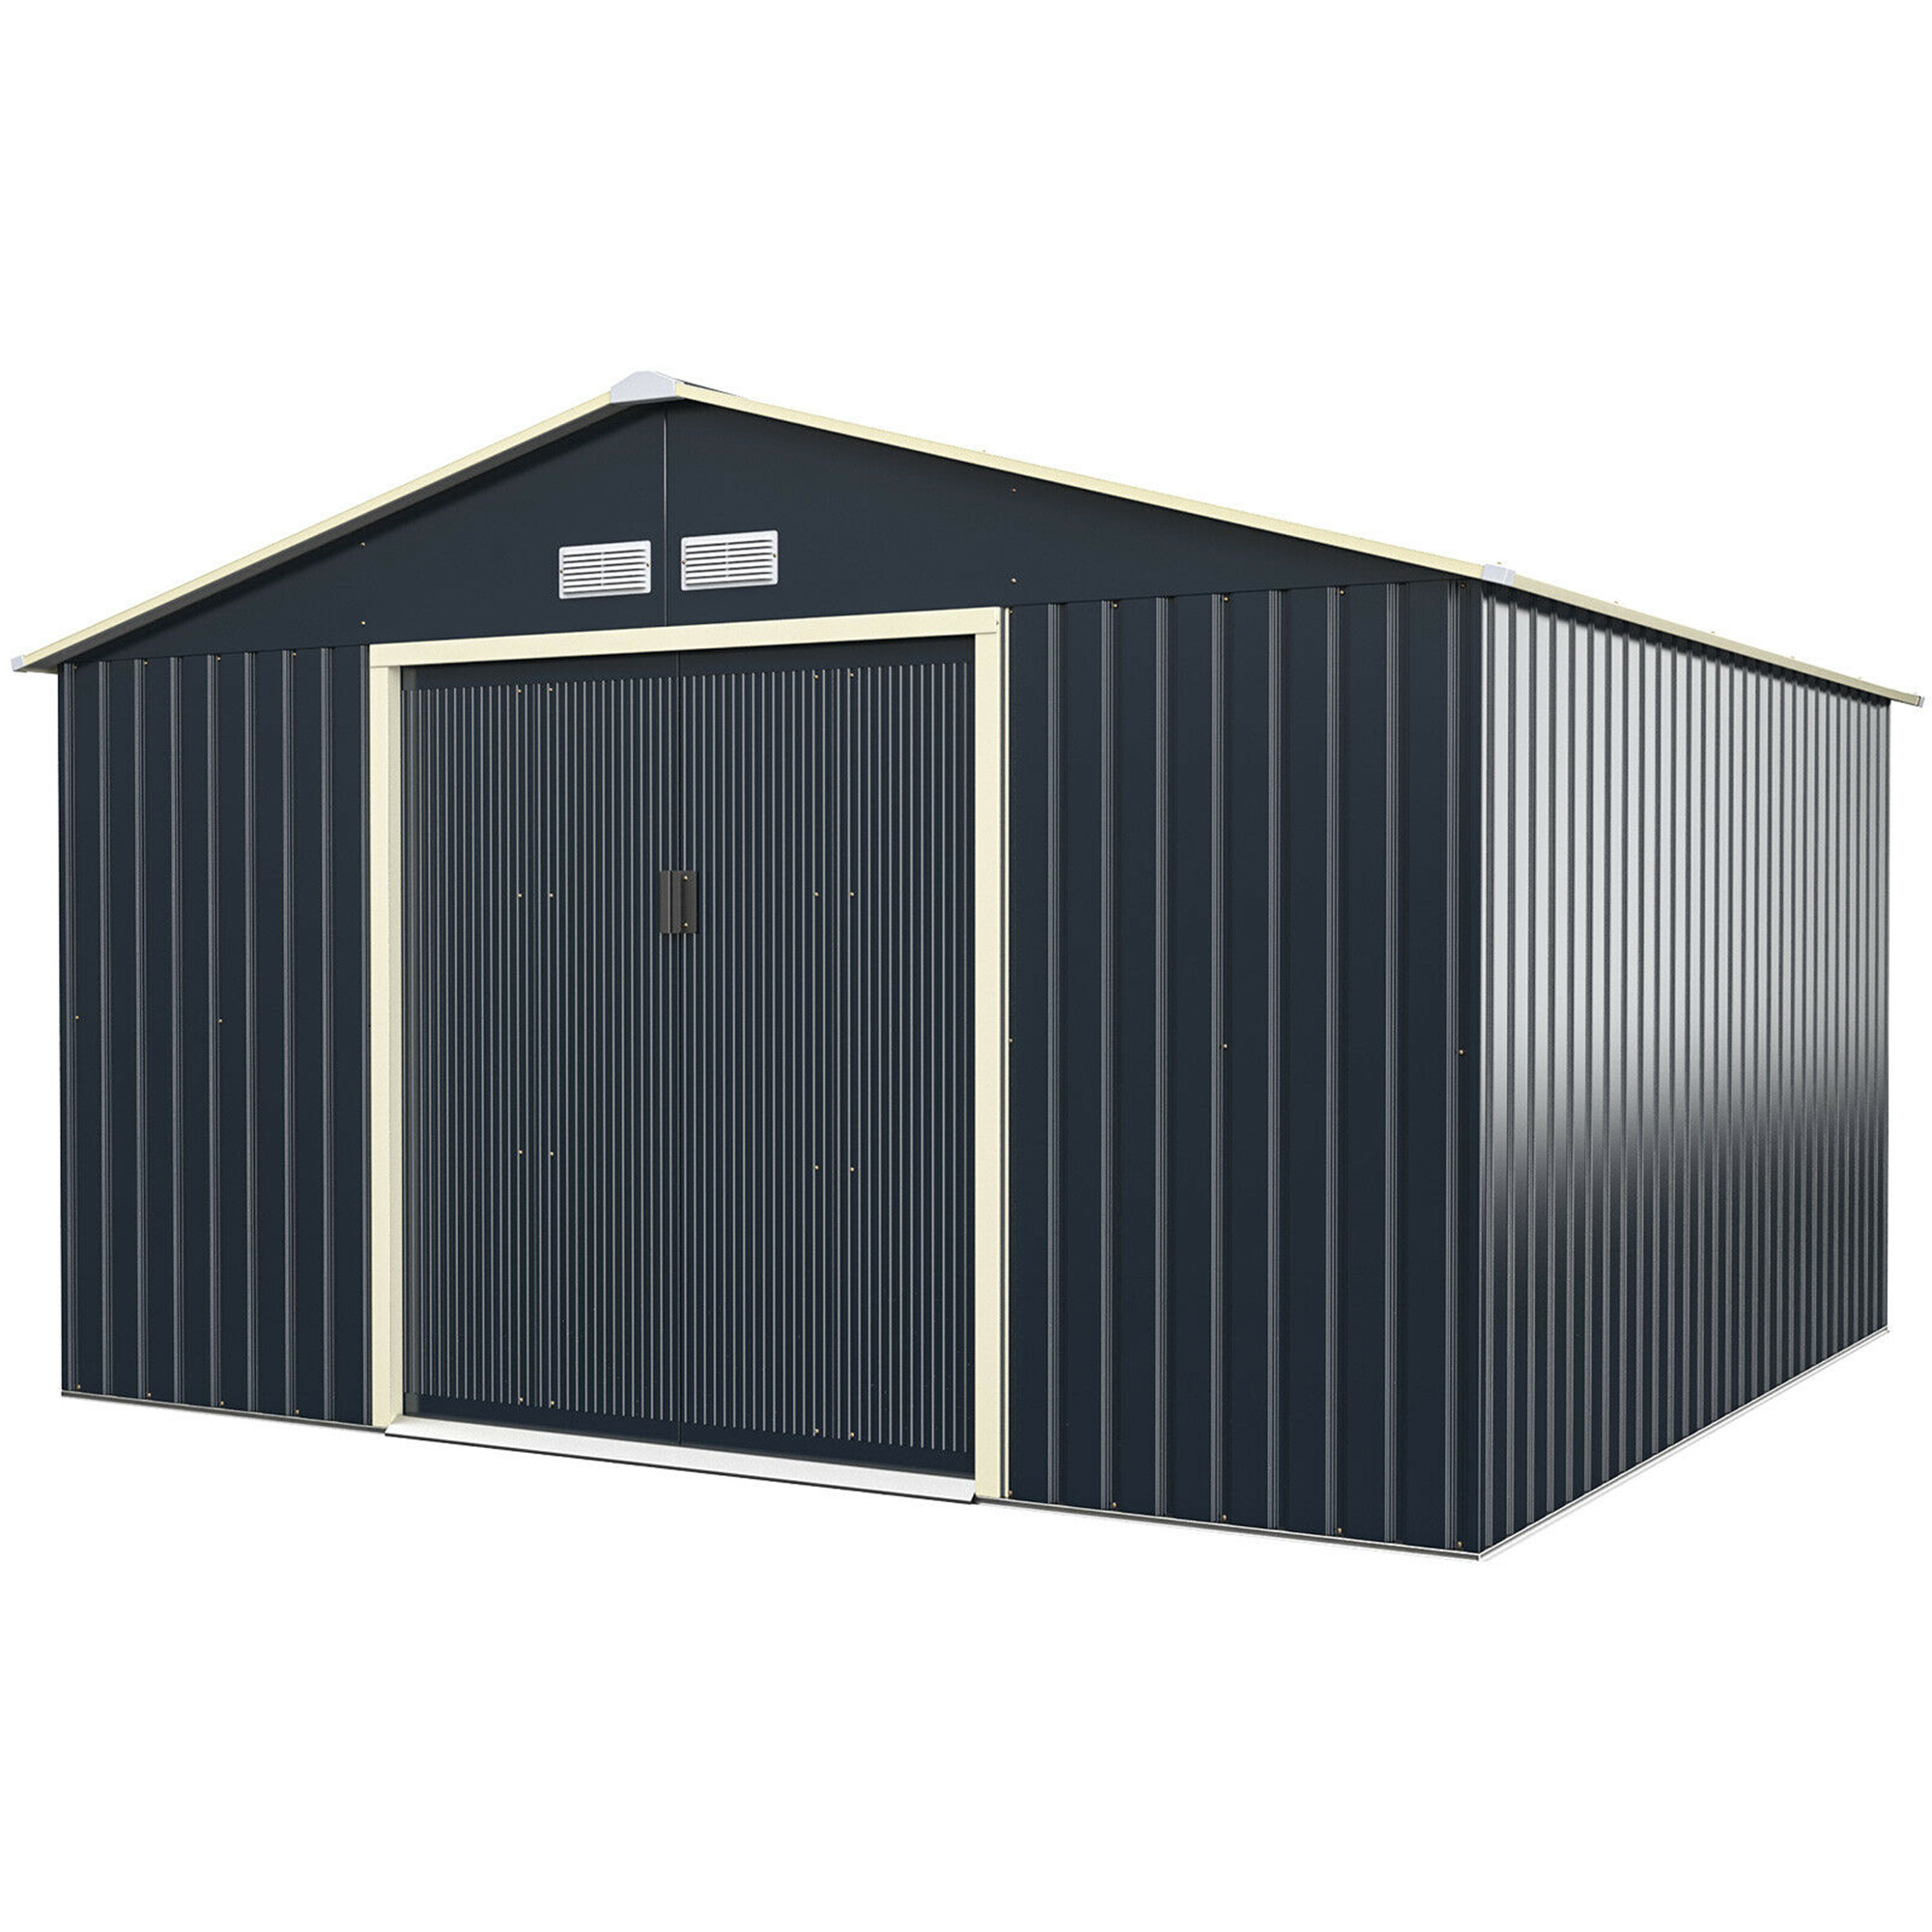 Gymax 11' x 10' Outdoor Tool Storage Shed Large Utility Storage House w/ Sliding Door - image 1 of 10